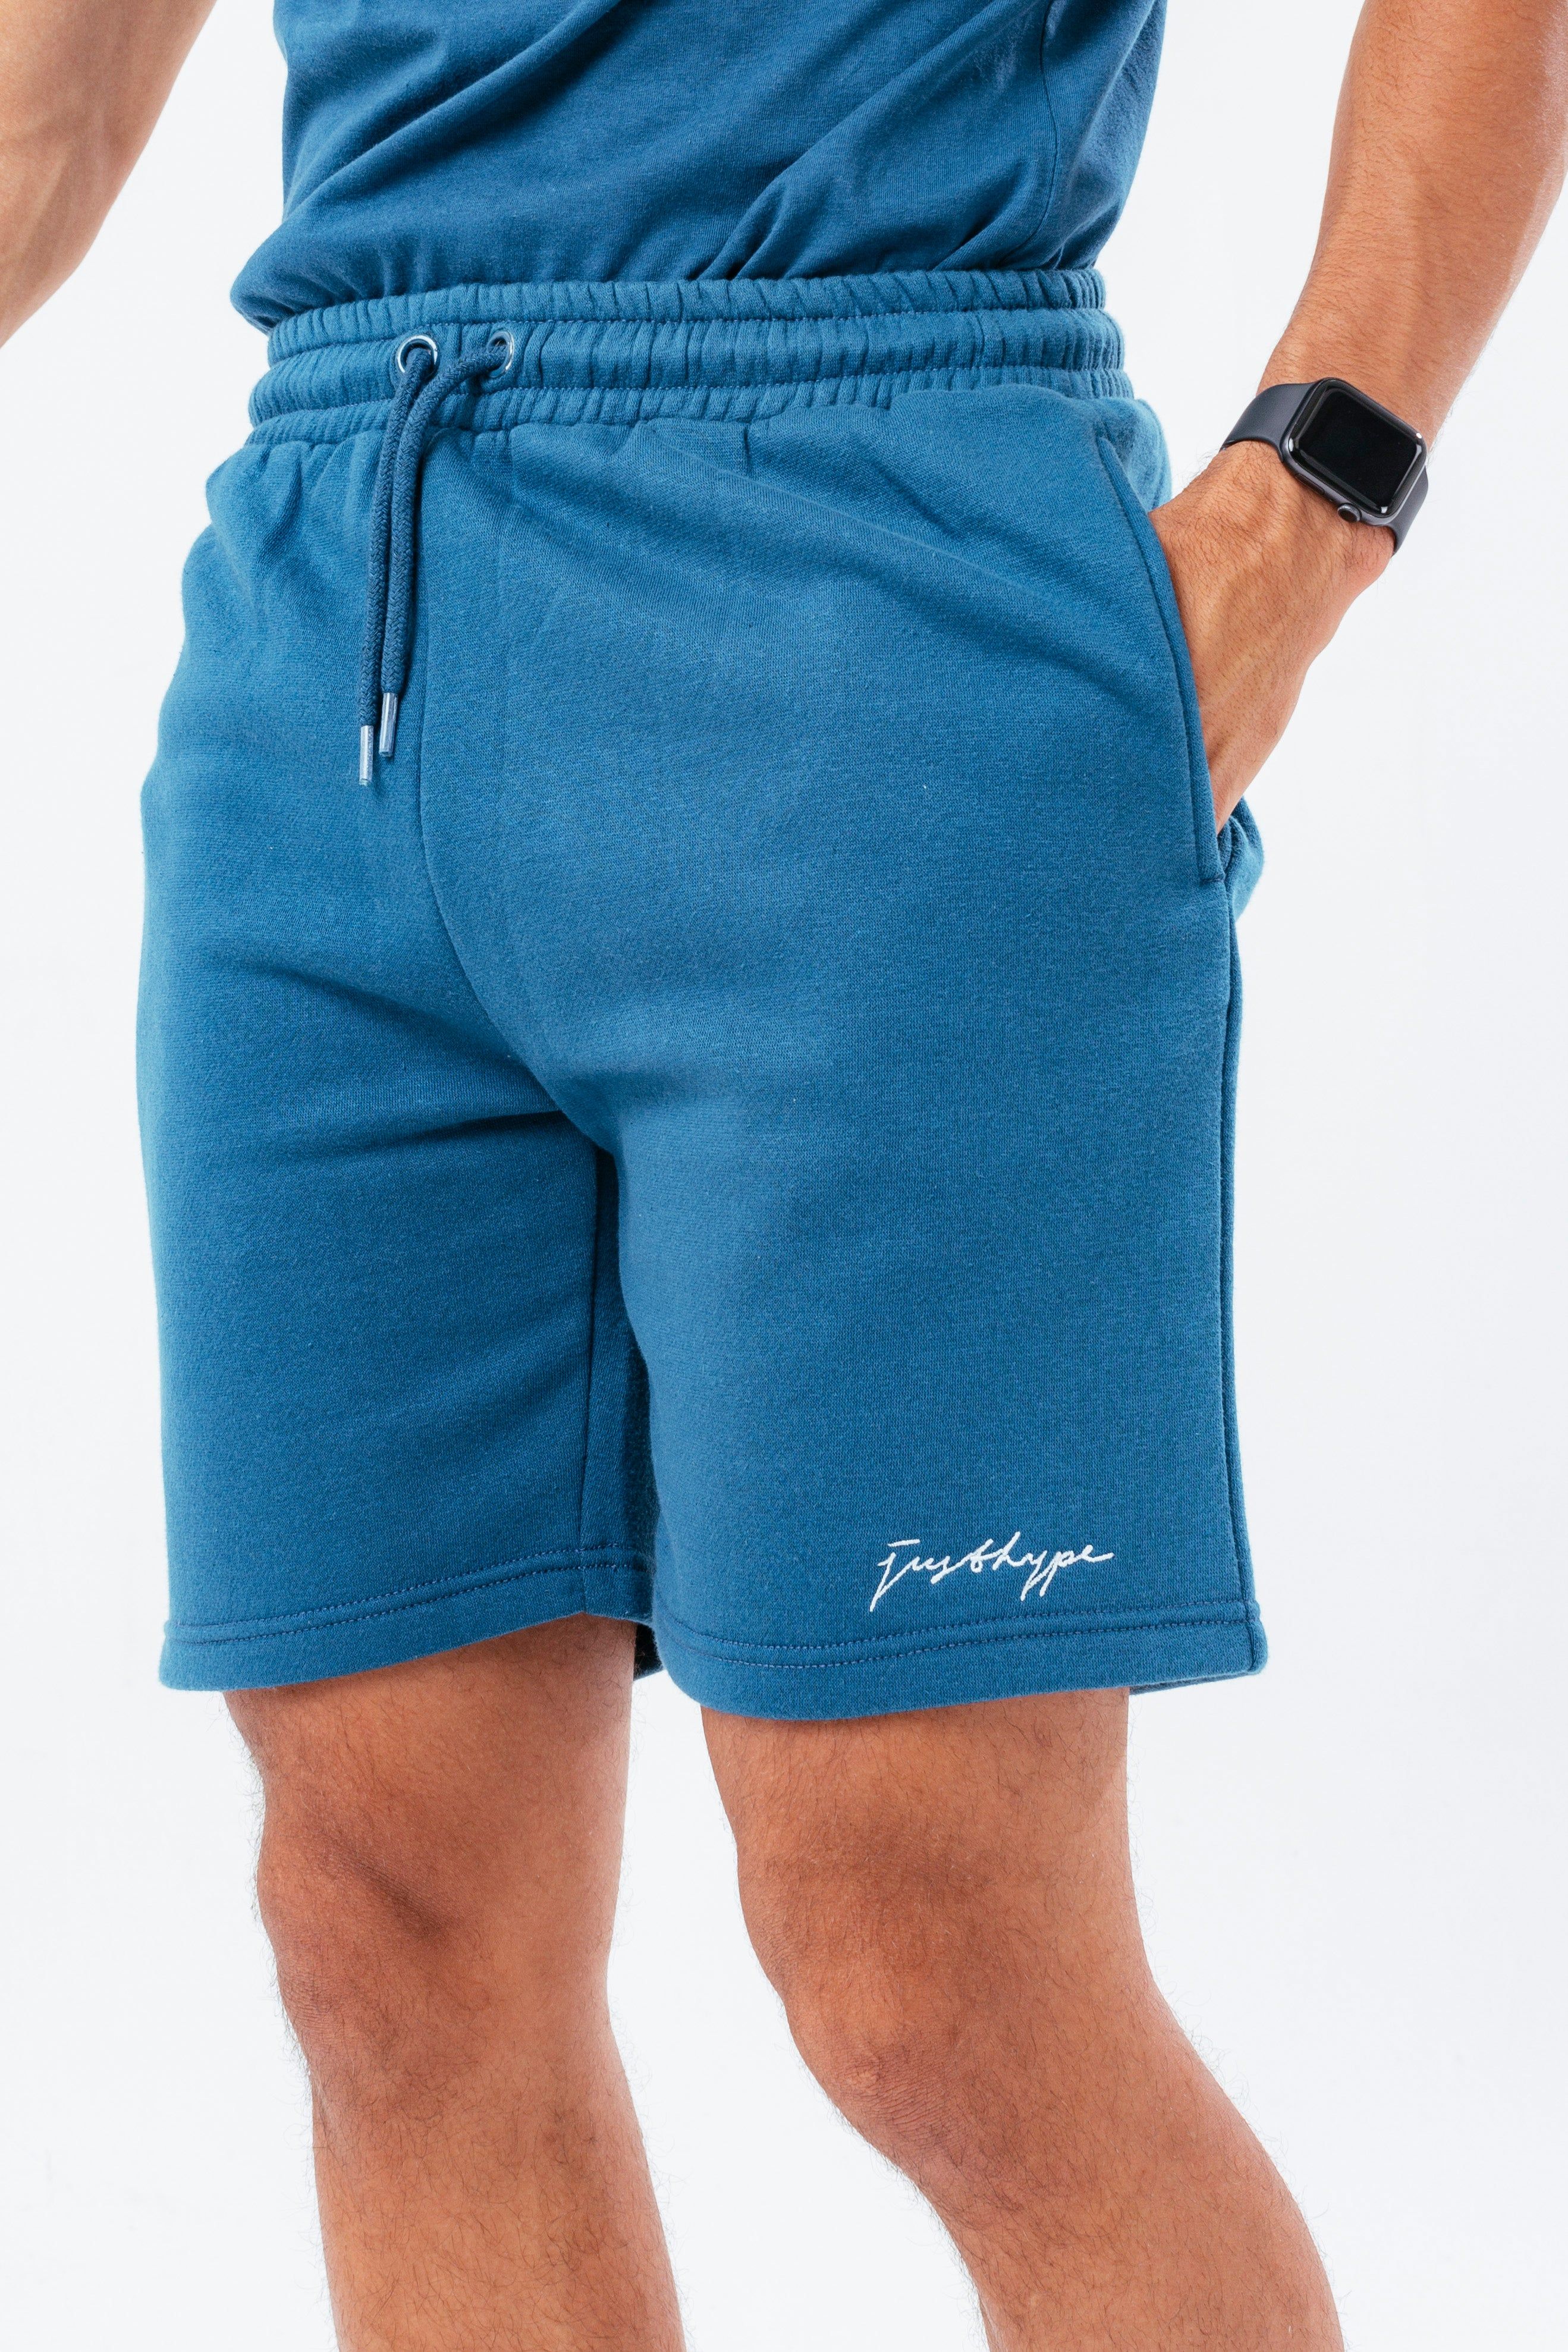 The HYPE. Men's Shorts are designed in a soft touch fabric base for the ultimate comfort. With drawstring pullers and an elasticated waistband finished with branded eyelets. The Model wears a size M. Machine washable.